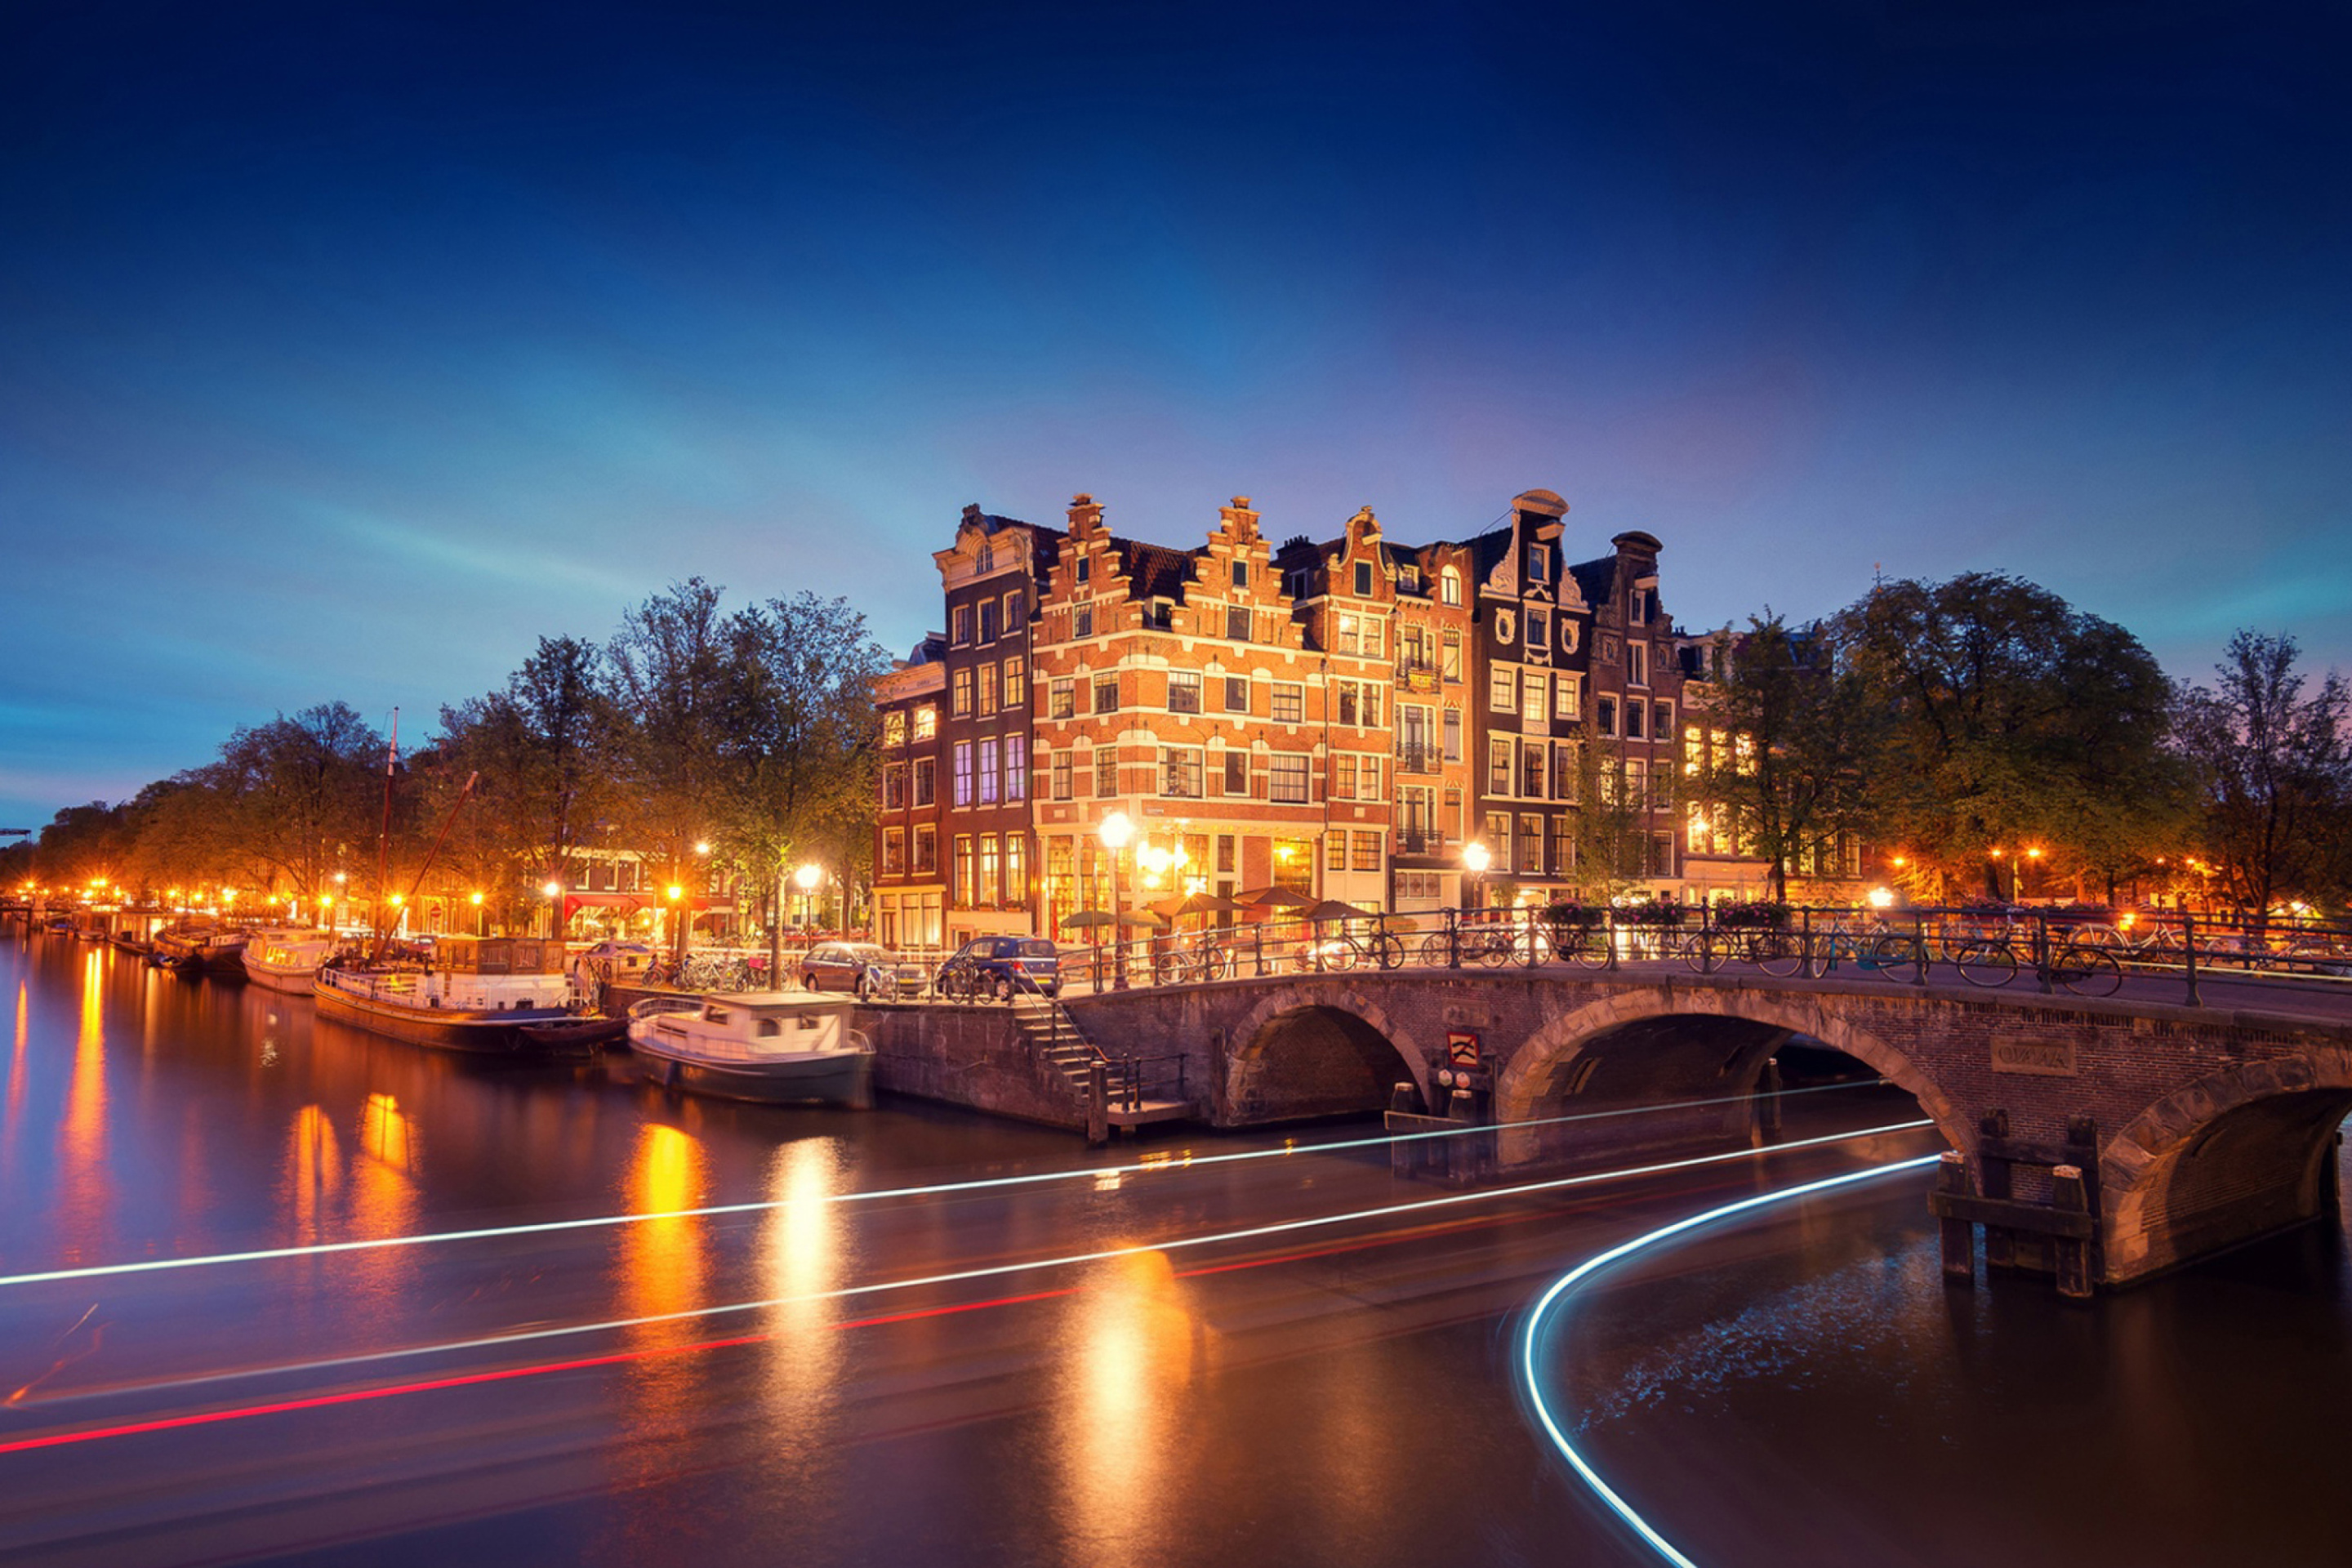 Amsterdam Attraction at Evening wallpaper 2880x1920